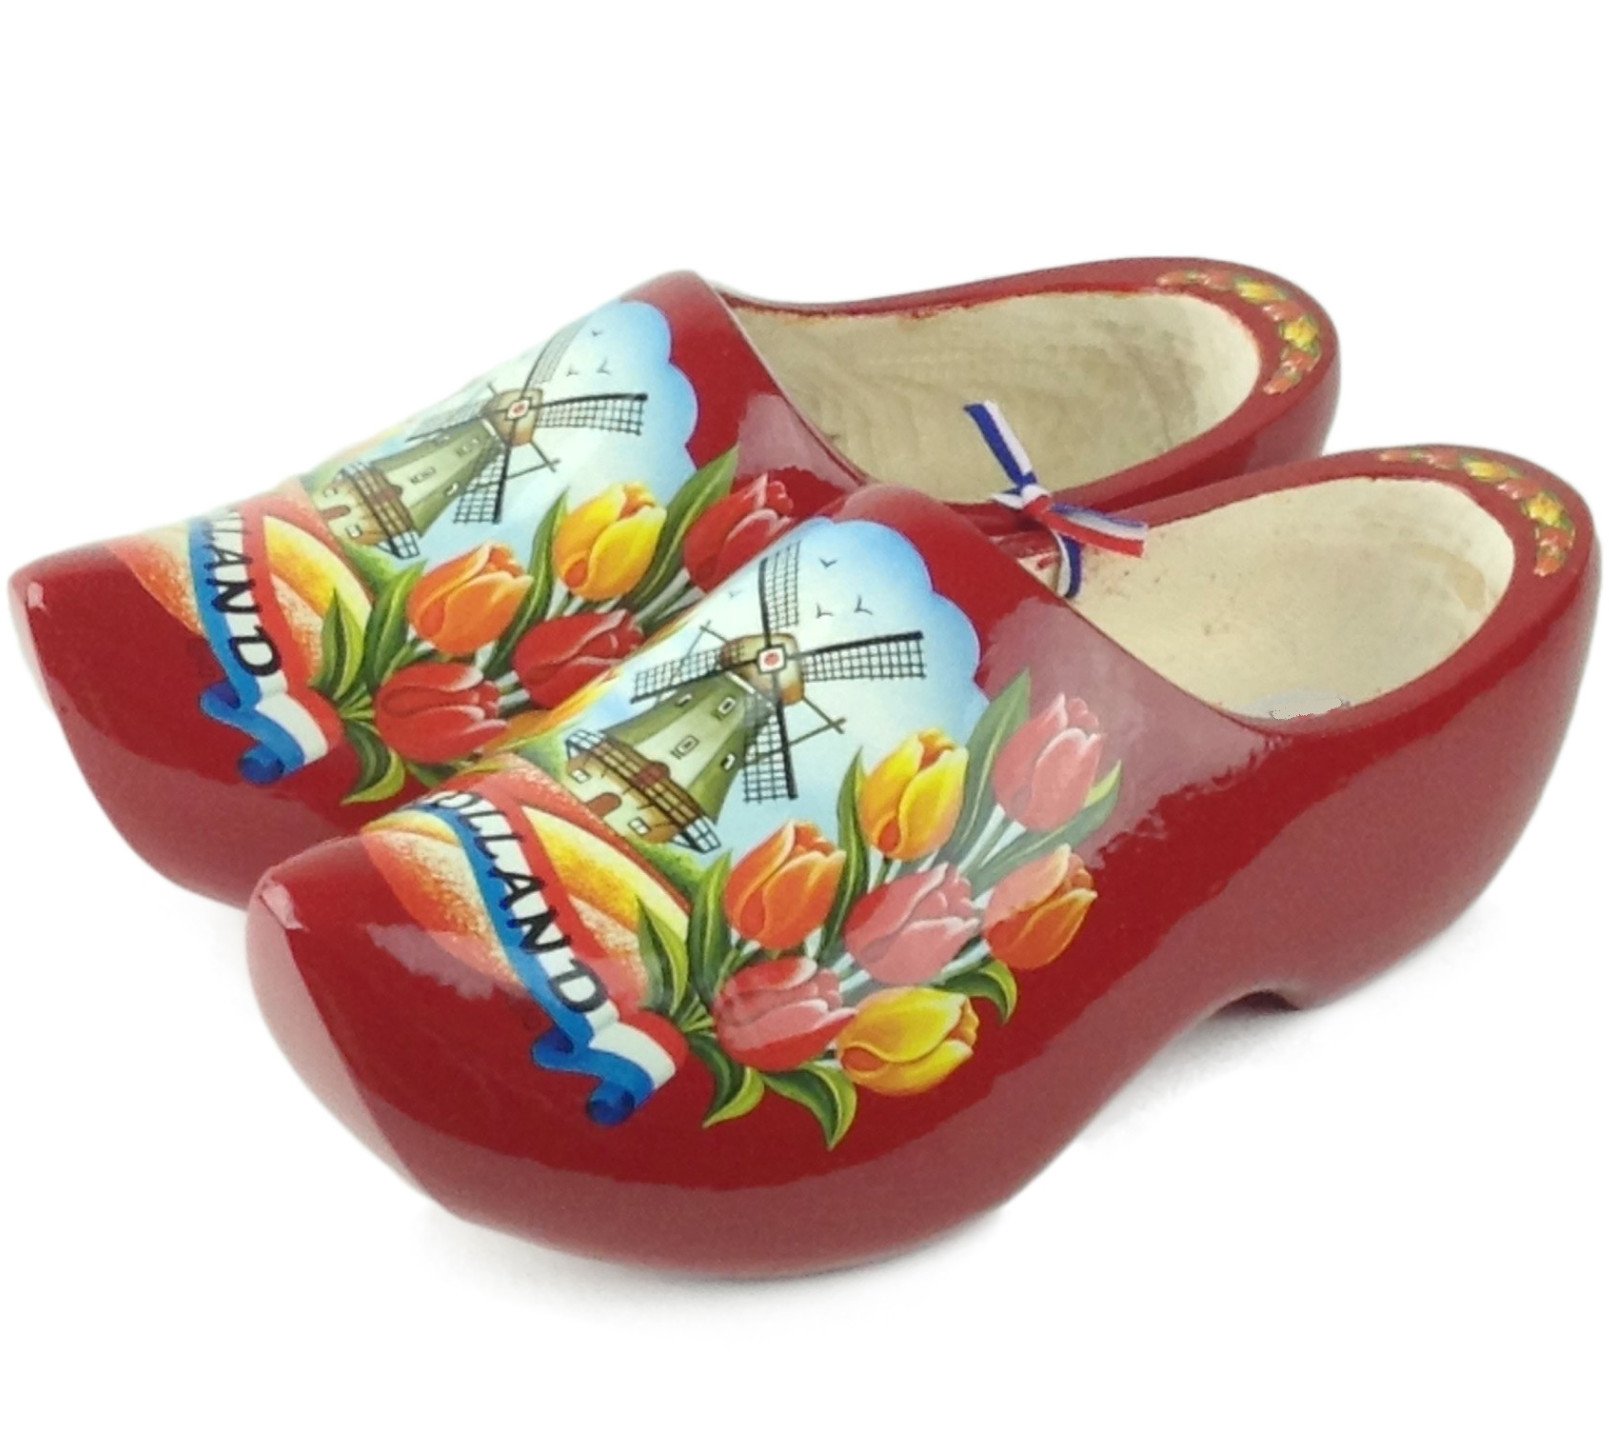 Red Design Wooden Shoes: Made In Holland | OktoberfestHaus.com